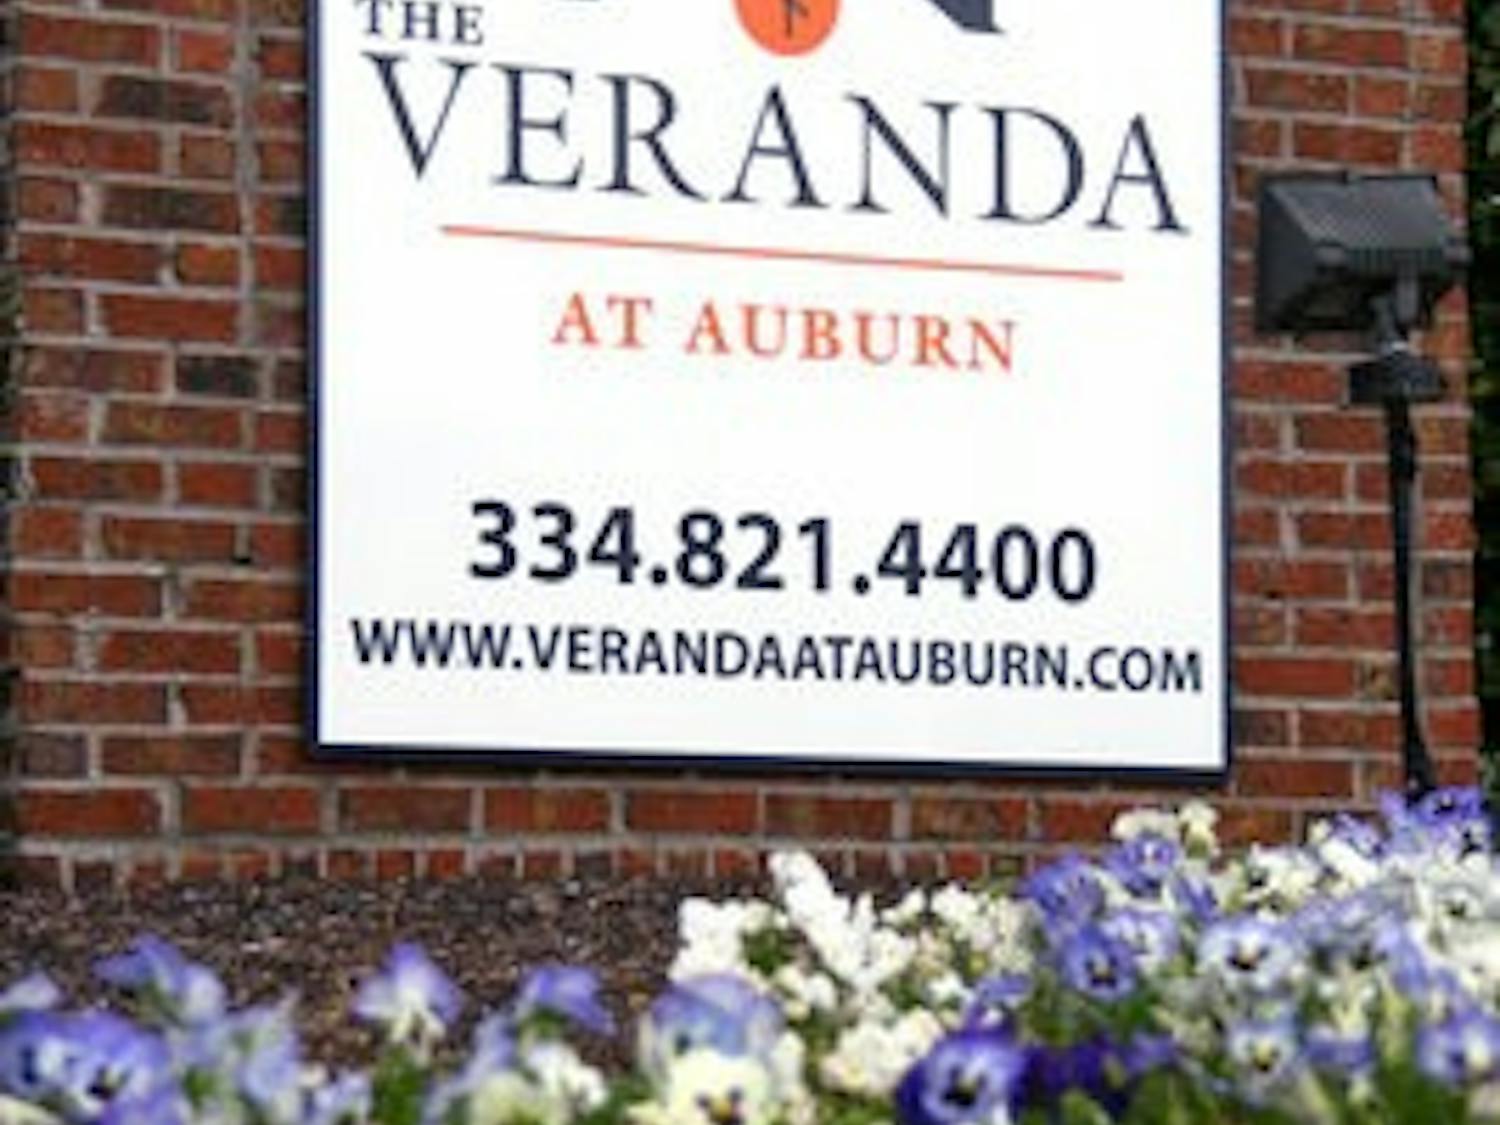 Auburn Crossing on Wire Road has received renovations and has been renamed The Veranda at Auburn. (Rebekah Weaver / ASSISTANT PHOTO EDITOR)